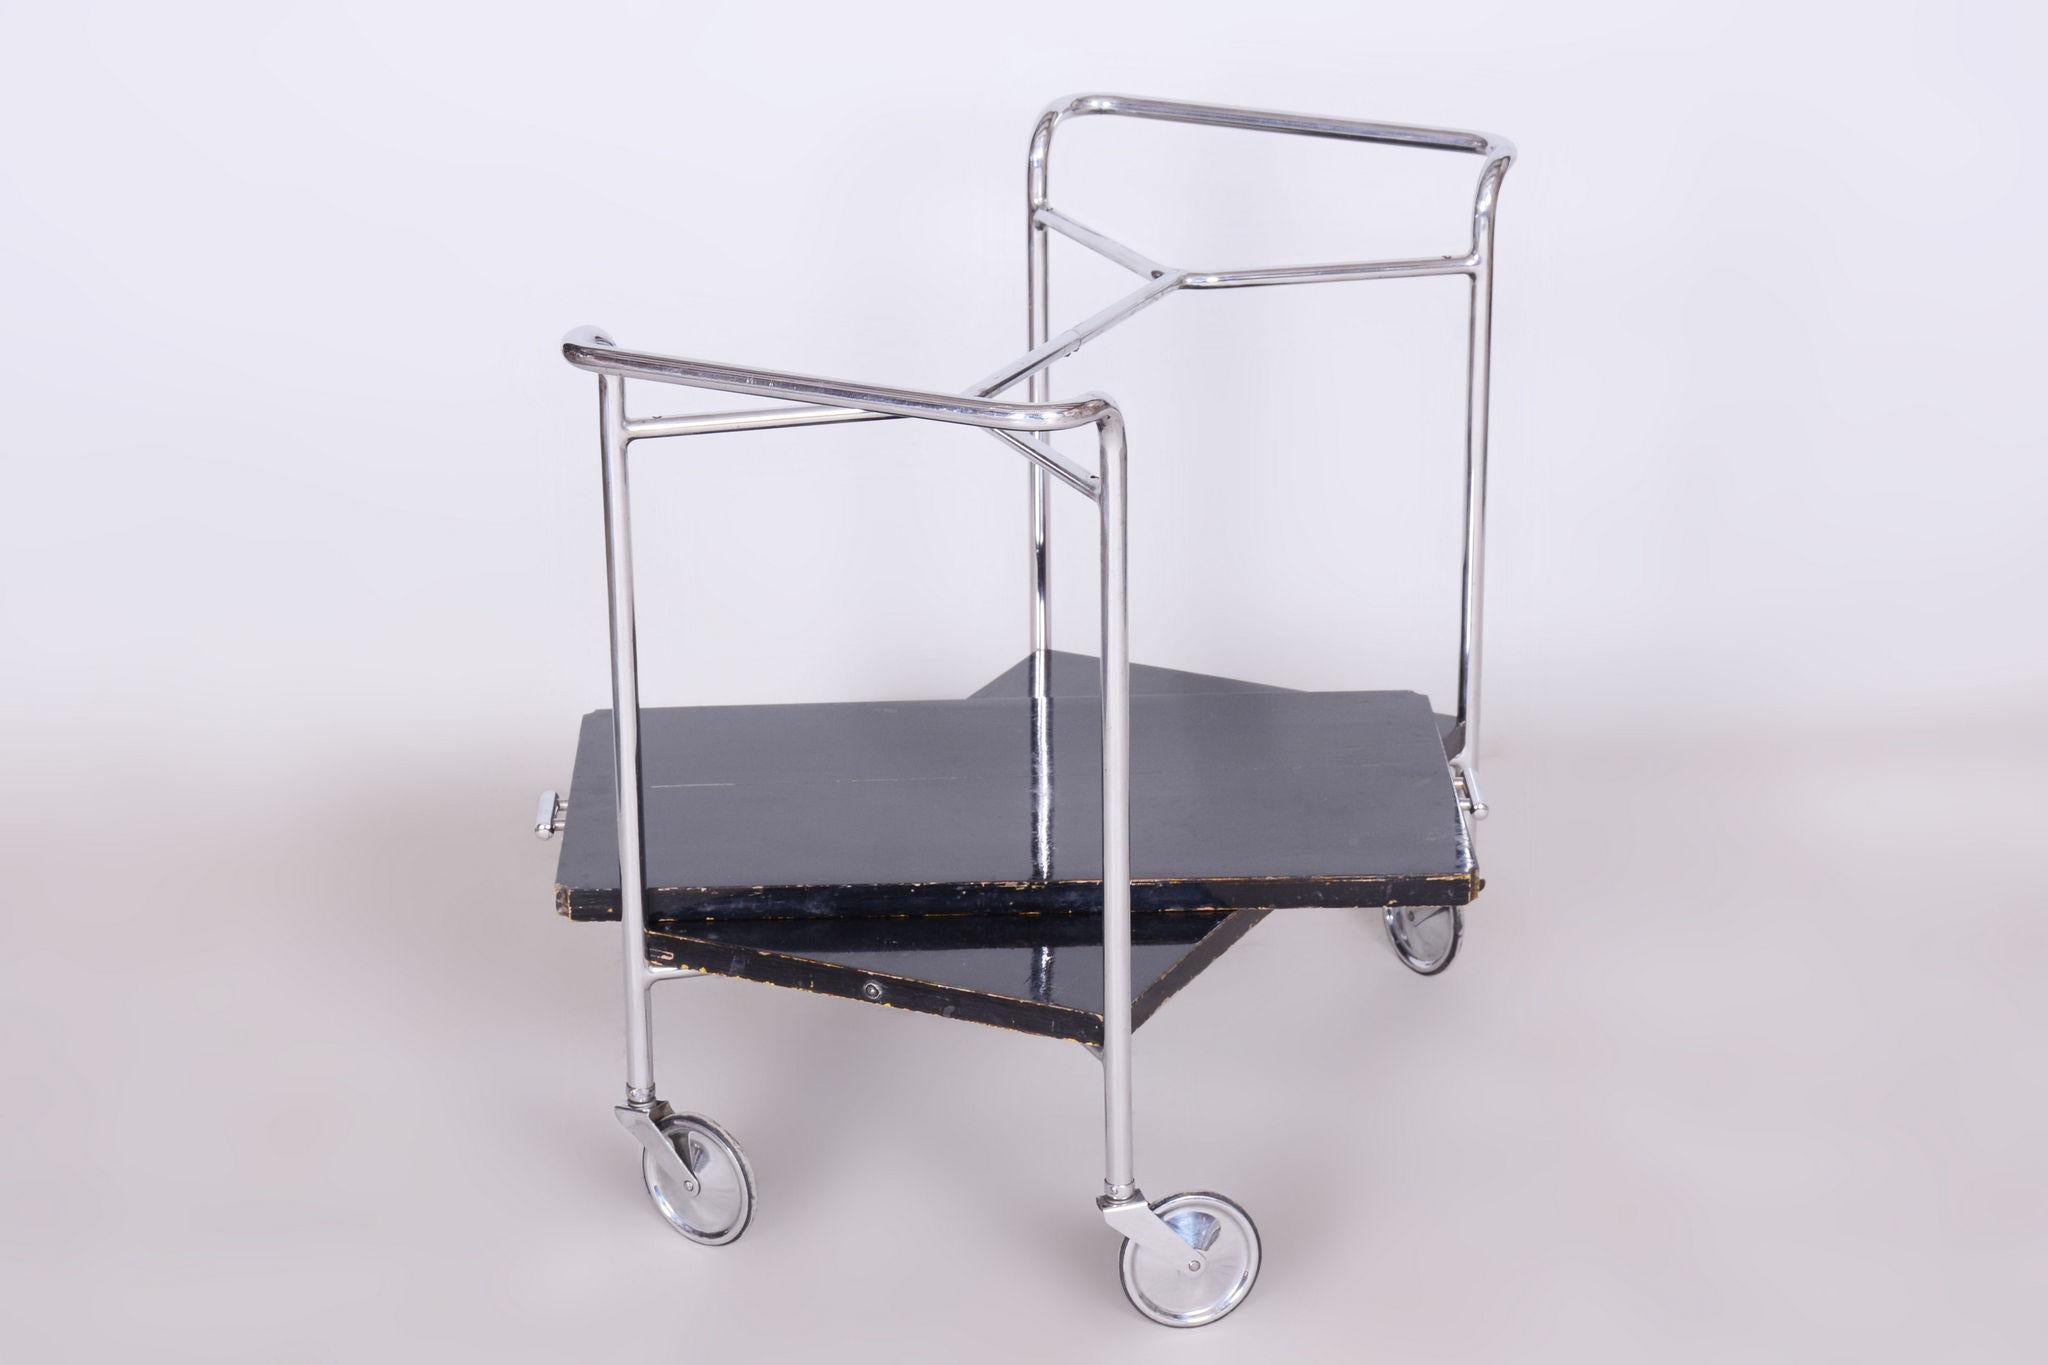 Restored Bauhaus Chrome Trolley Deisgned by Marcel Breuer.

Designer: Marcel Breuer
Maker: Mücke - Melder
Material: Chrome-plated Steel, Lacquered Wood
Source: Czechia 
Period: 1930-1939
The upper removable plate serves as a portable serving